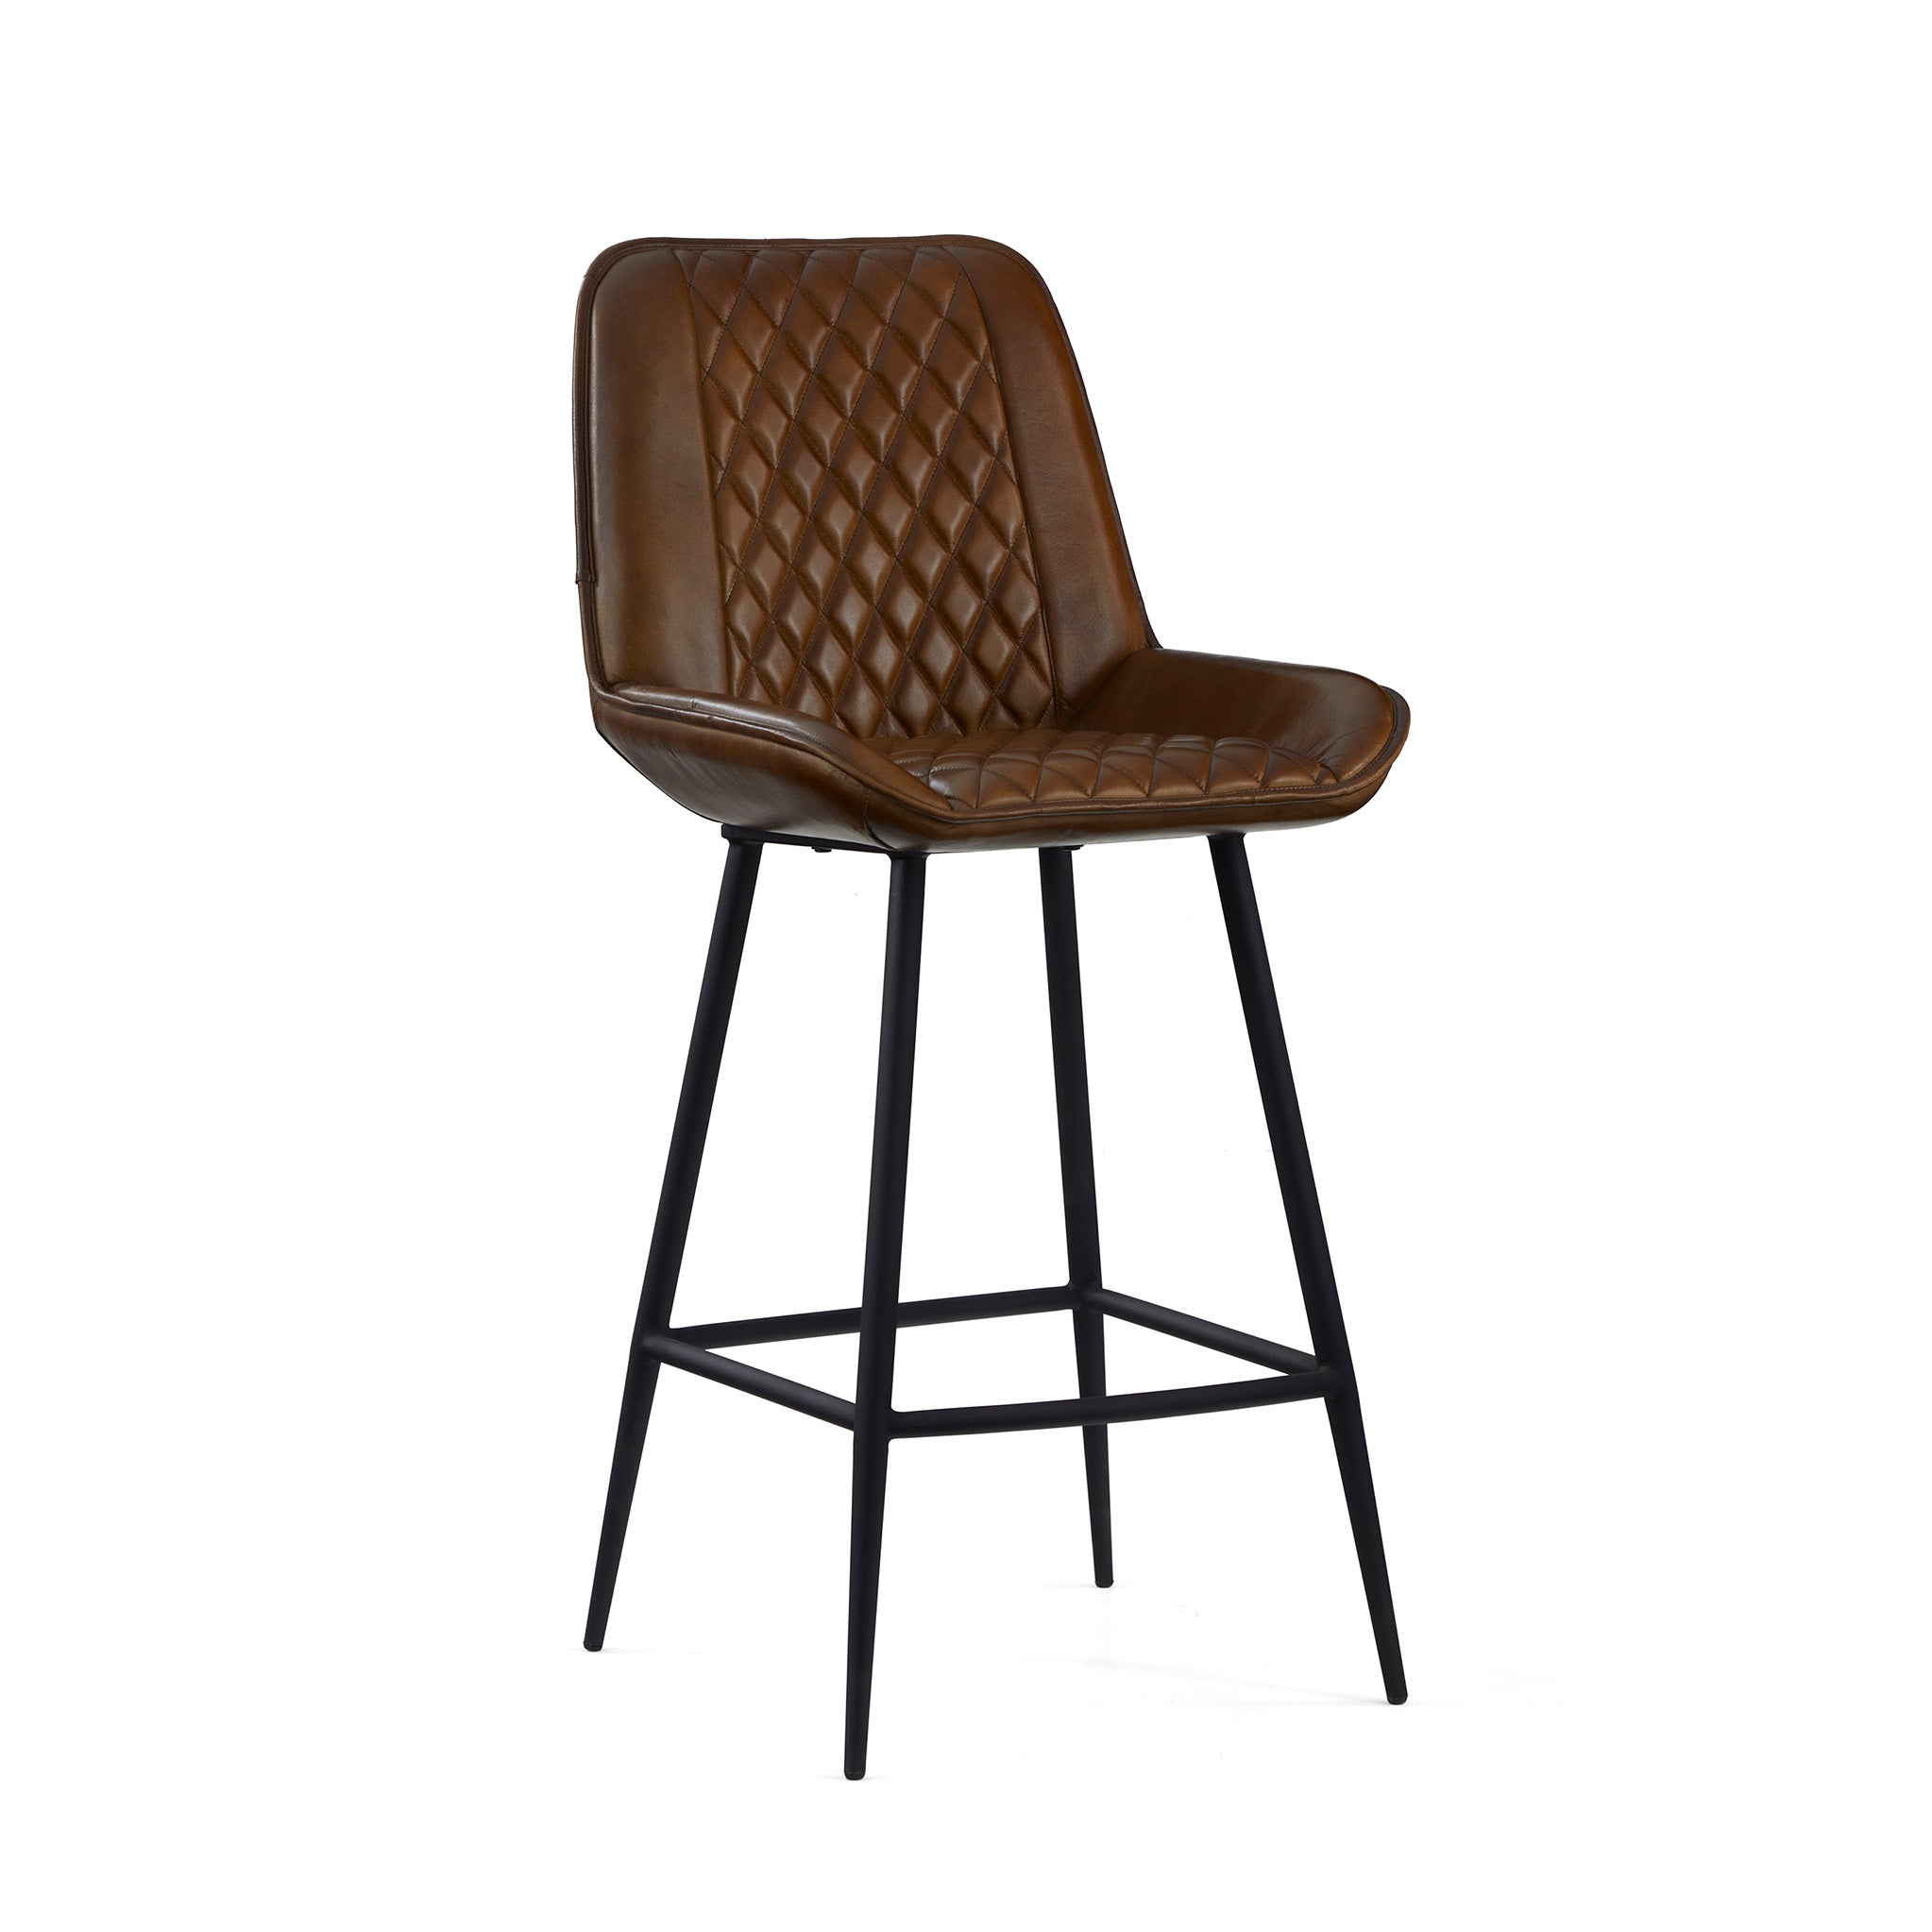 Rex Quilted Buffalo Aniline Leather Vintage Bar Stools Grey Or Brown